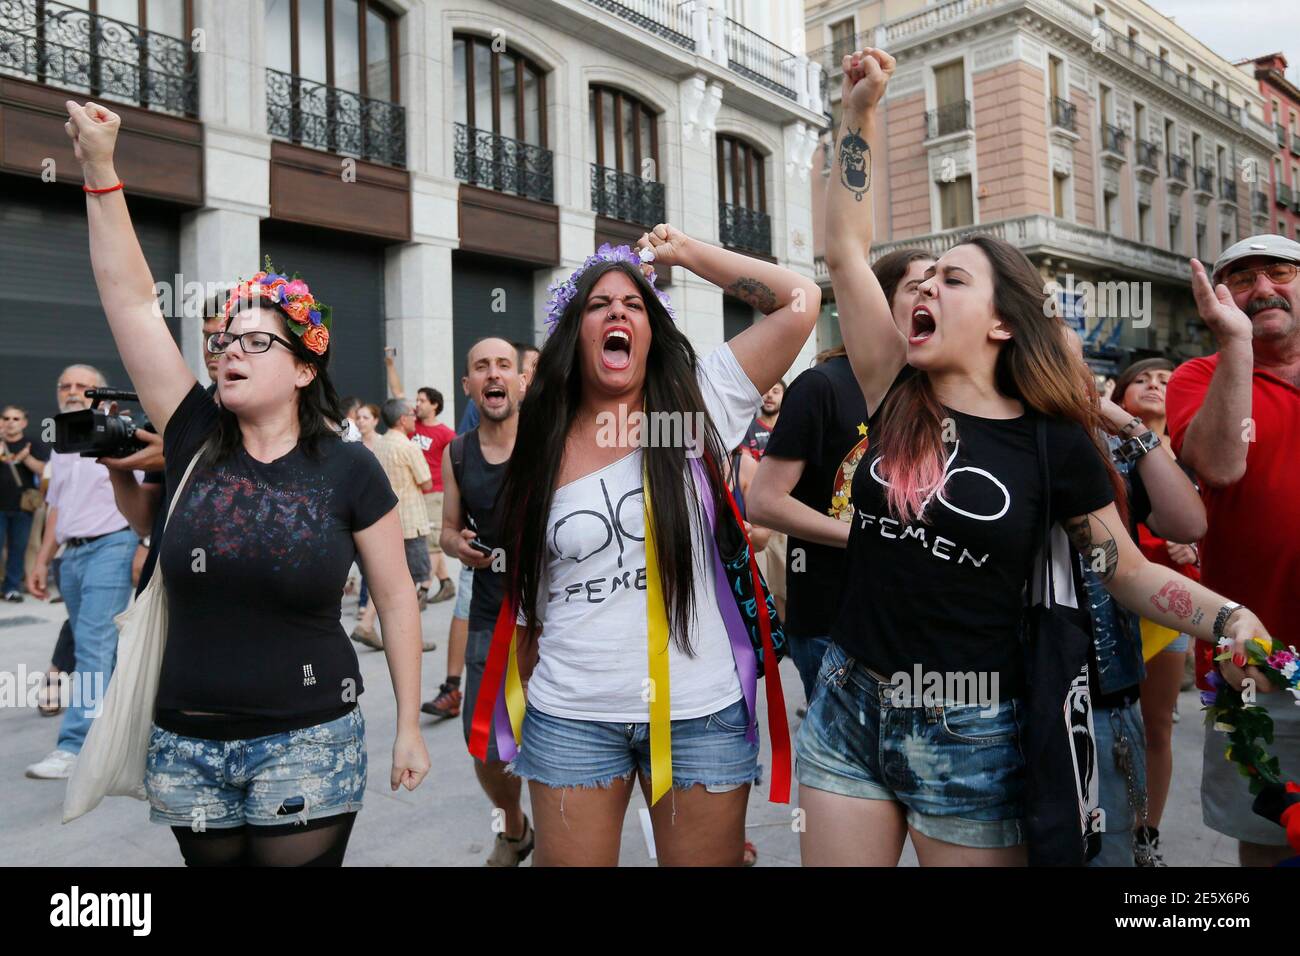 Anti-monarchy demonstrators shout slogans during a Republican protest, after the swearing-in ceremony of Spain's new King Felipe VI in Madrid, at the landmark Puerta del Sol square in Madrid June 19, 2014. Spain's new king, Felipe VI, was sworn in on Thursday in a low-key ceremony which monarchists hope will usher in a new era of popularity for the troubled royal household. REUTERS/Gonzalo Fuentes (SPAIN - Tags: CIVIL UNREST POLITICS ROYALS TPX IMAGES OF THE DAY) Stock Photo